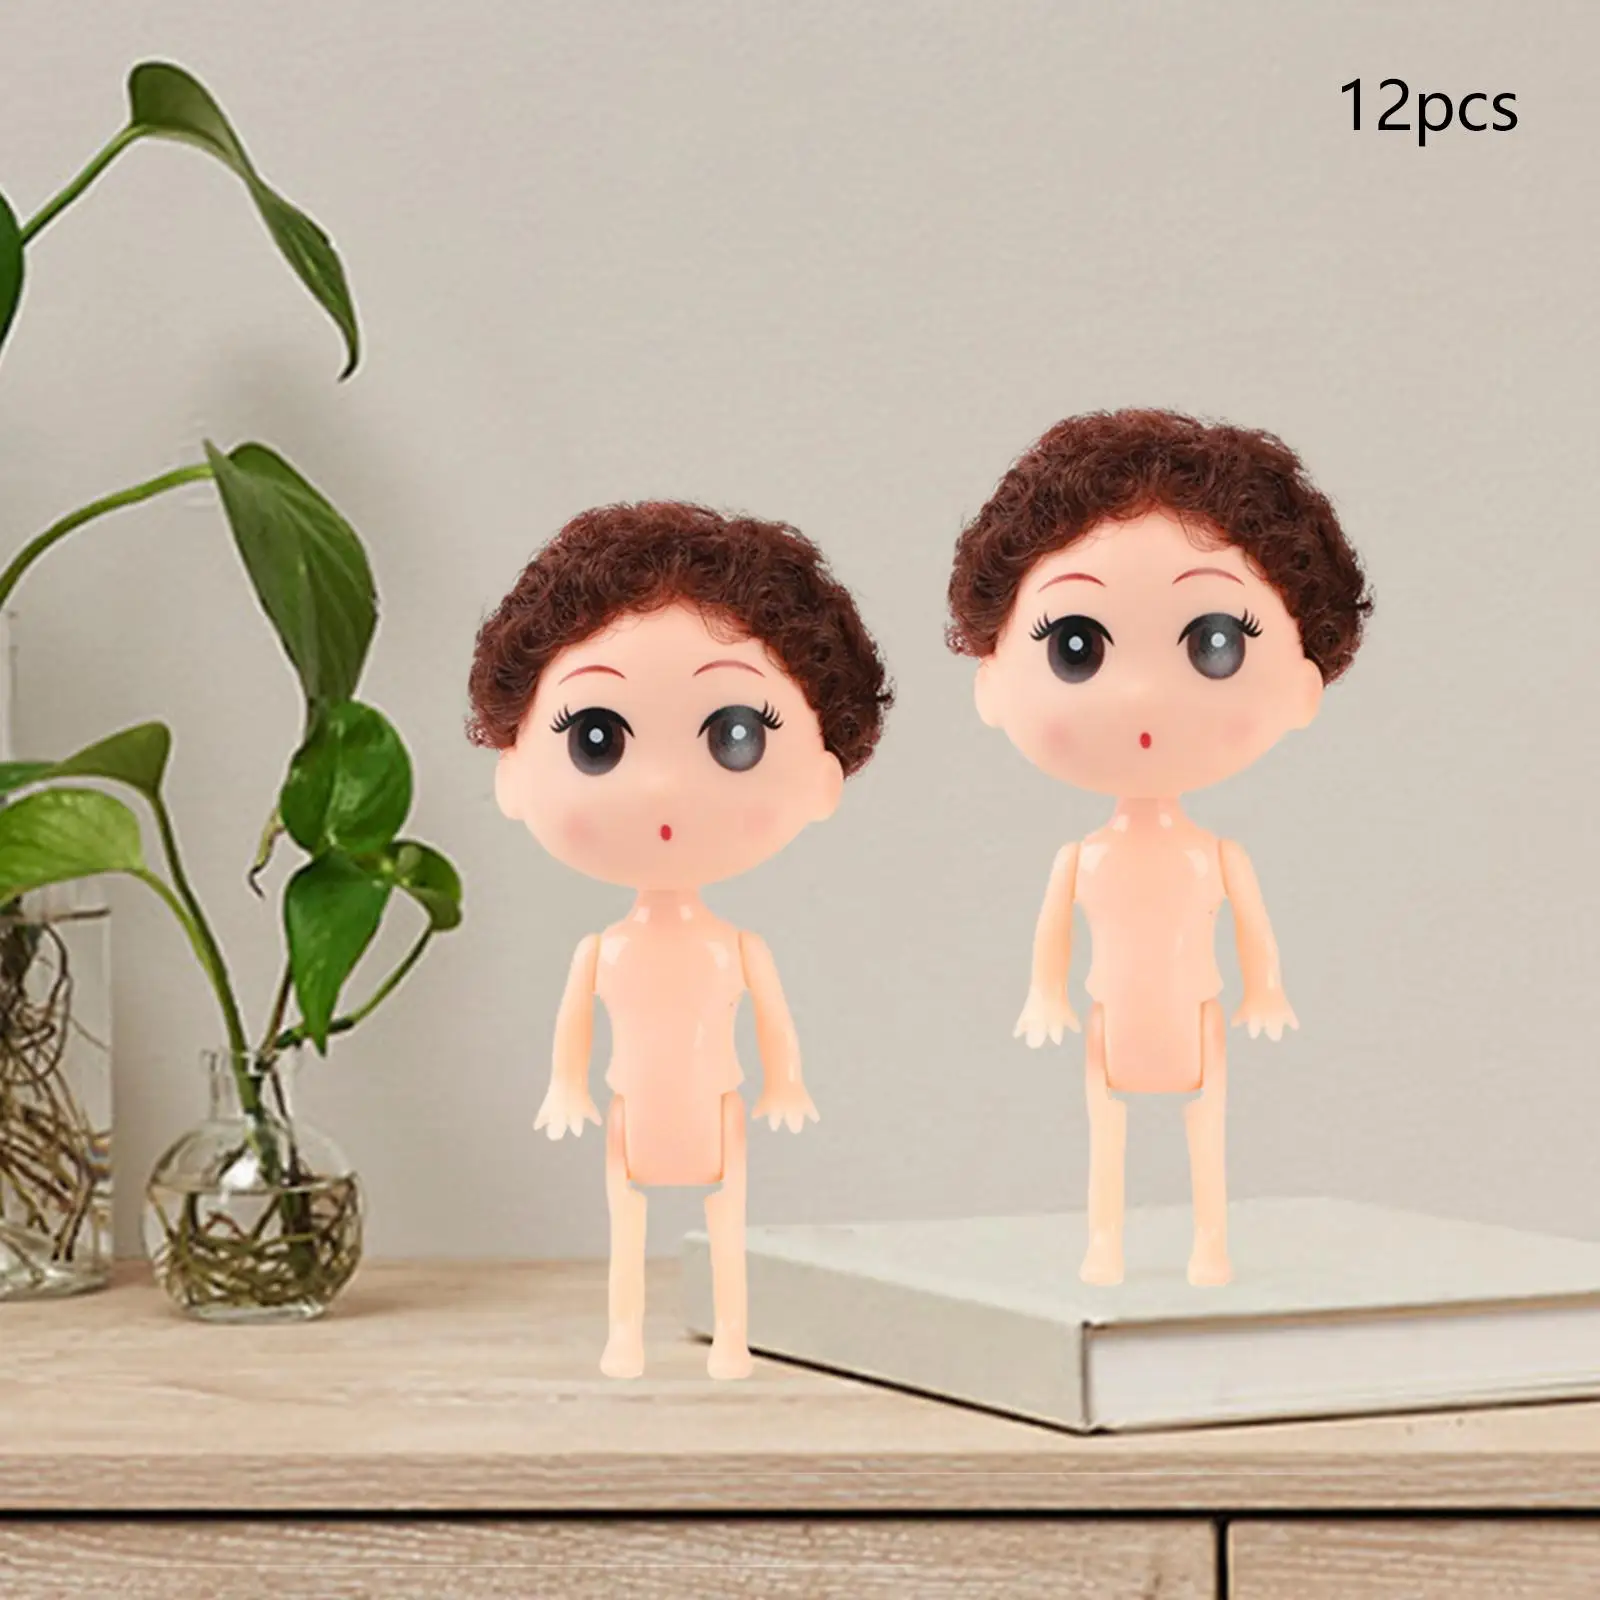 Cute Boys Dolls Flexible 12cm Moveable for Kids Children Holiday Gifts